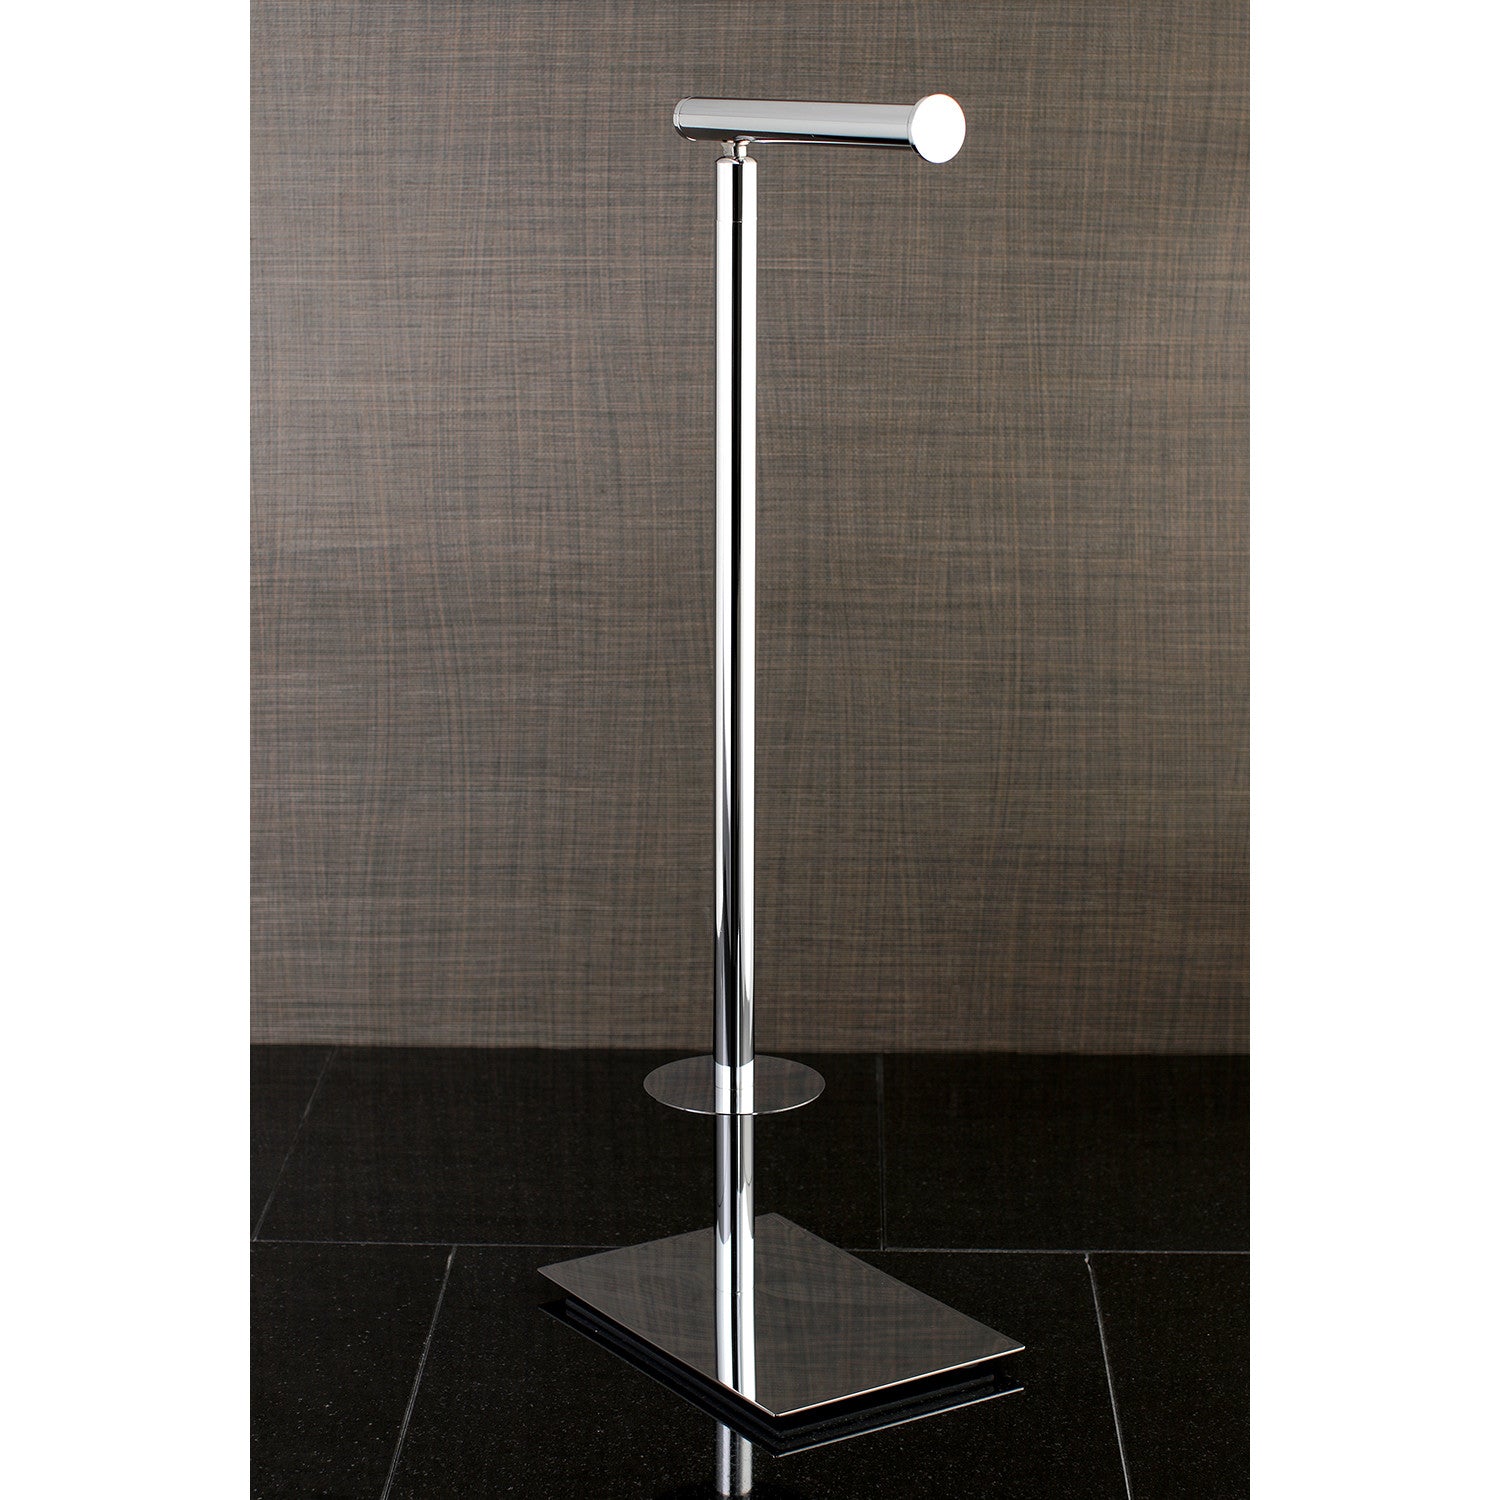 DW 11, Freestanding Toilet Paper Holder in Polished Chrome